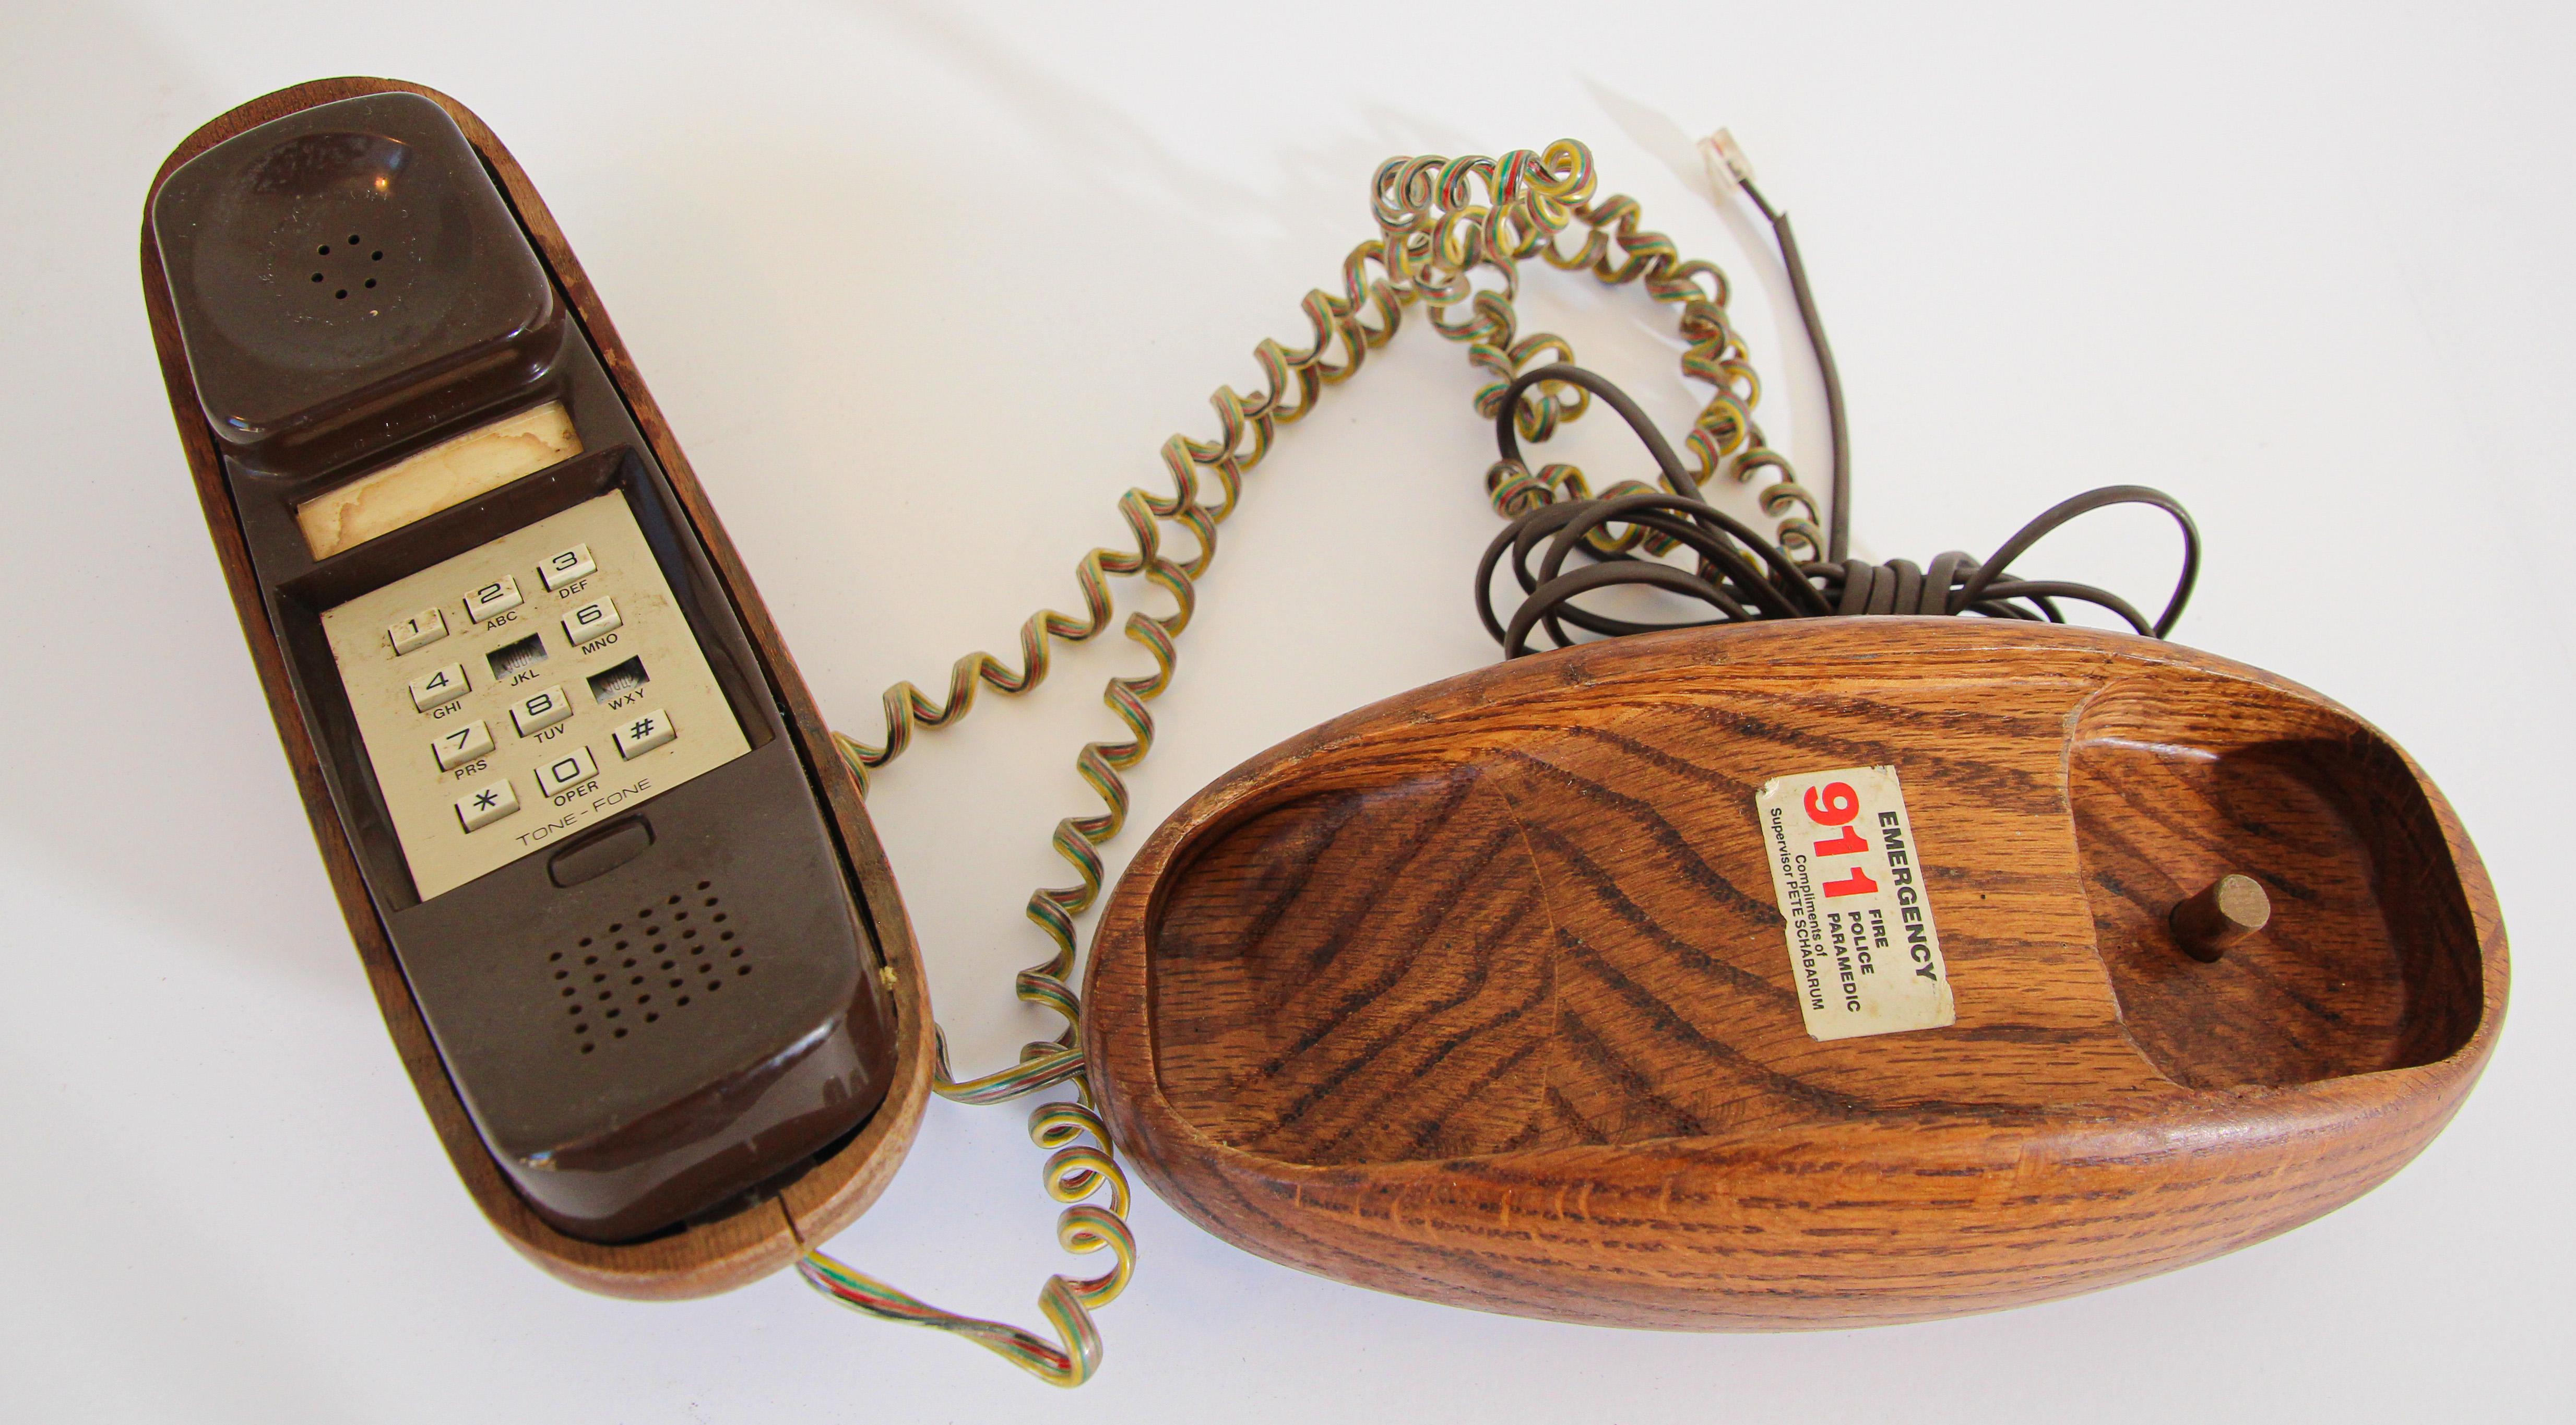 Asian Vintage Wood Covered Telephone, Organic Mid Century Modern Style